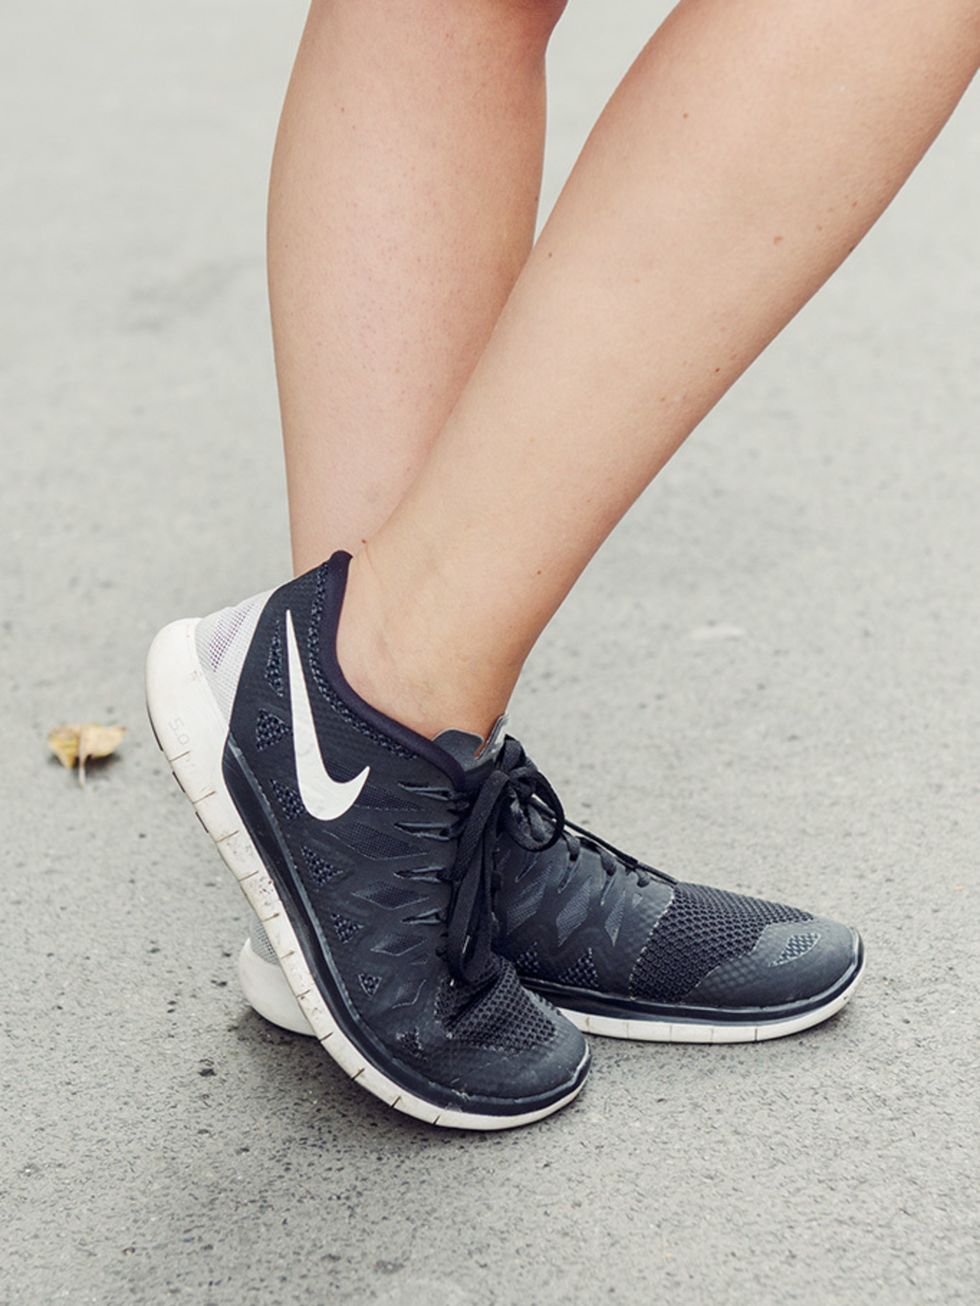 <p>Kirsty Dale - Executive Fashion & Beauty Director</p>

<p>Nike trainers.</p>